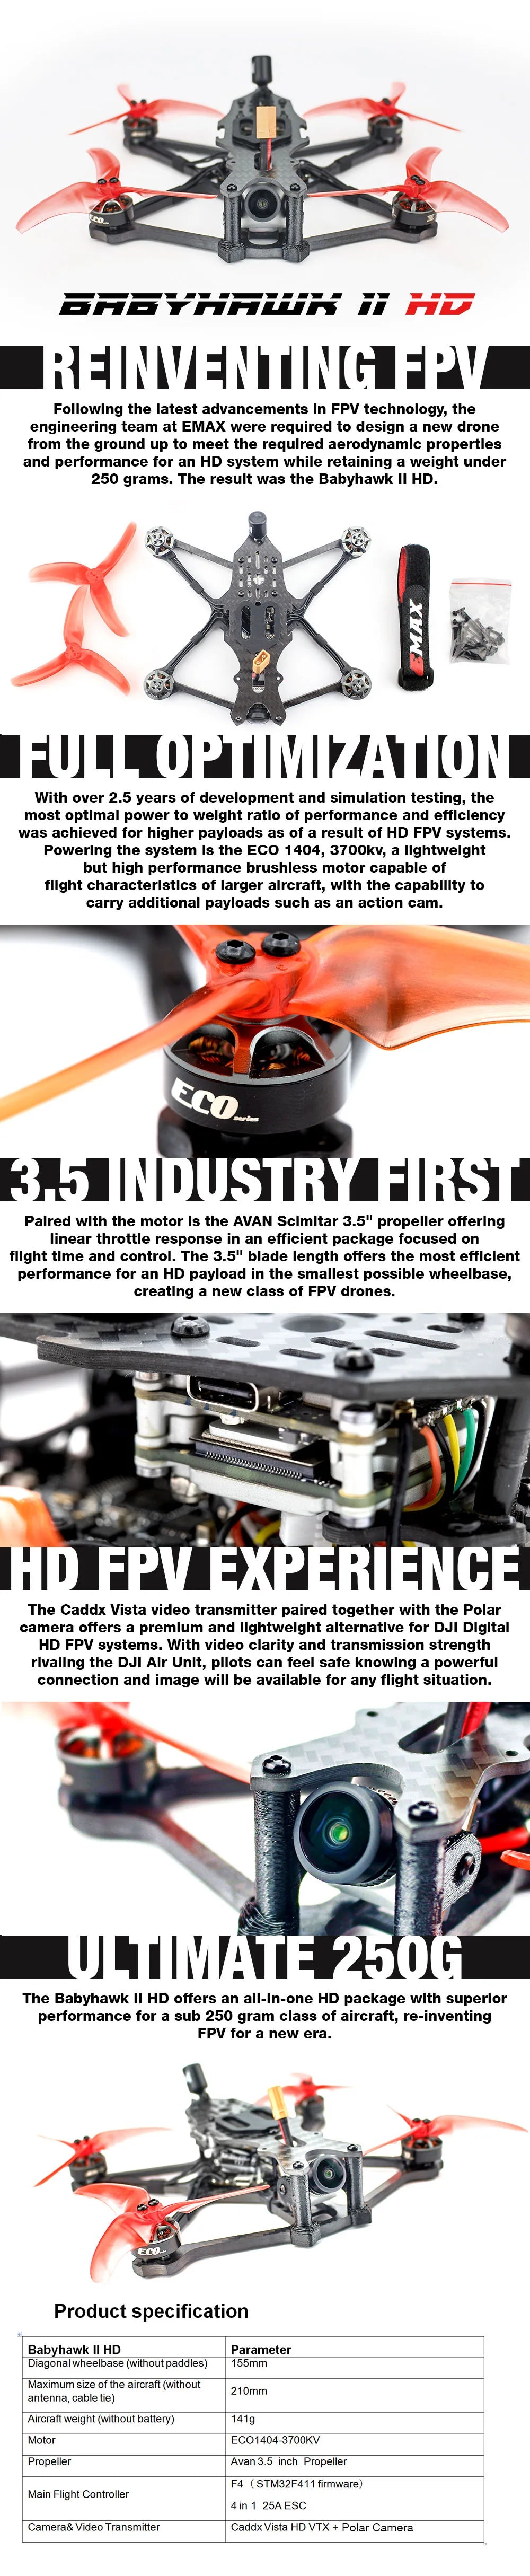 Emax Babyhawk 2 HD, the babyhawk II HD is an all-in-one FPV drone with superior performance